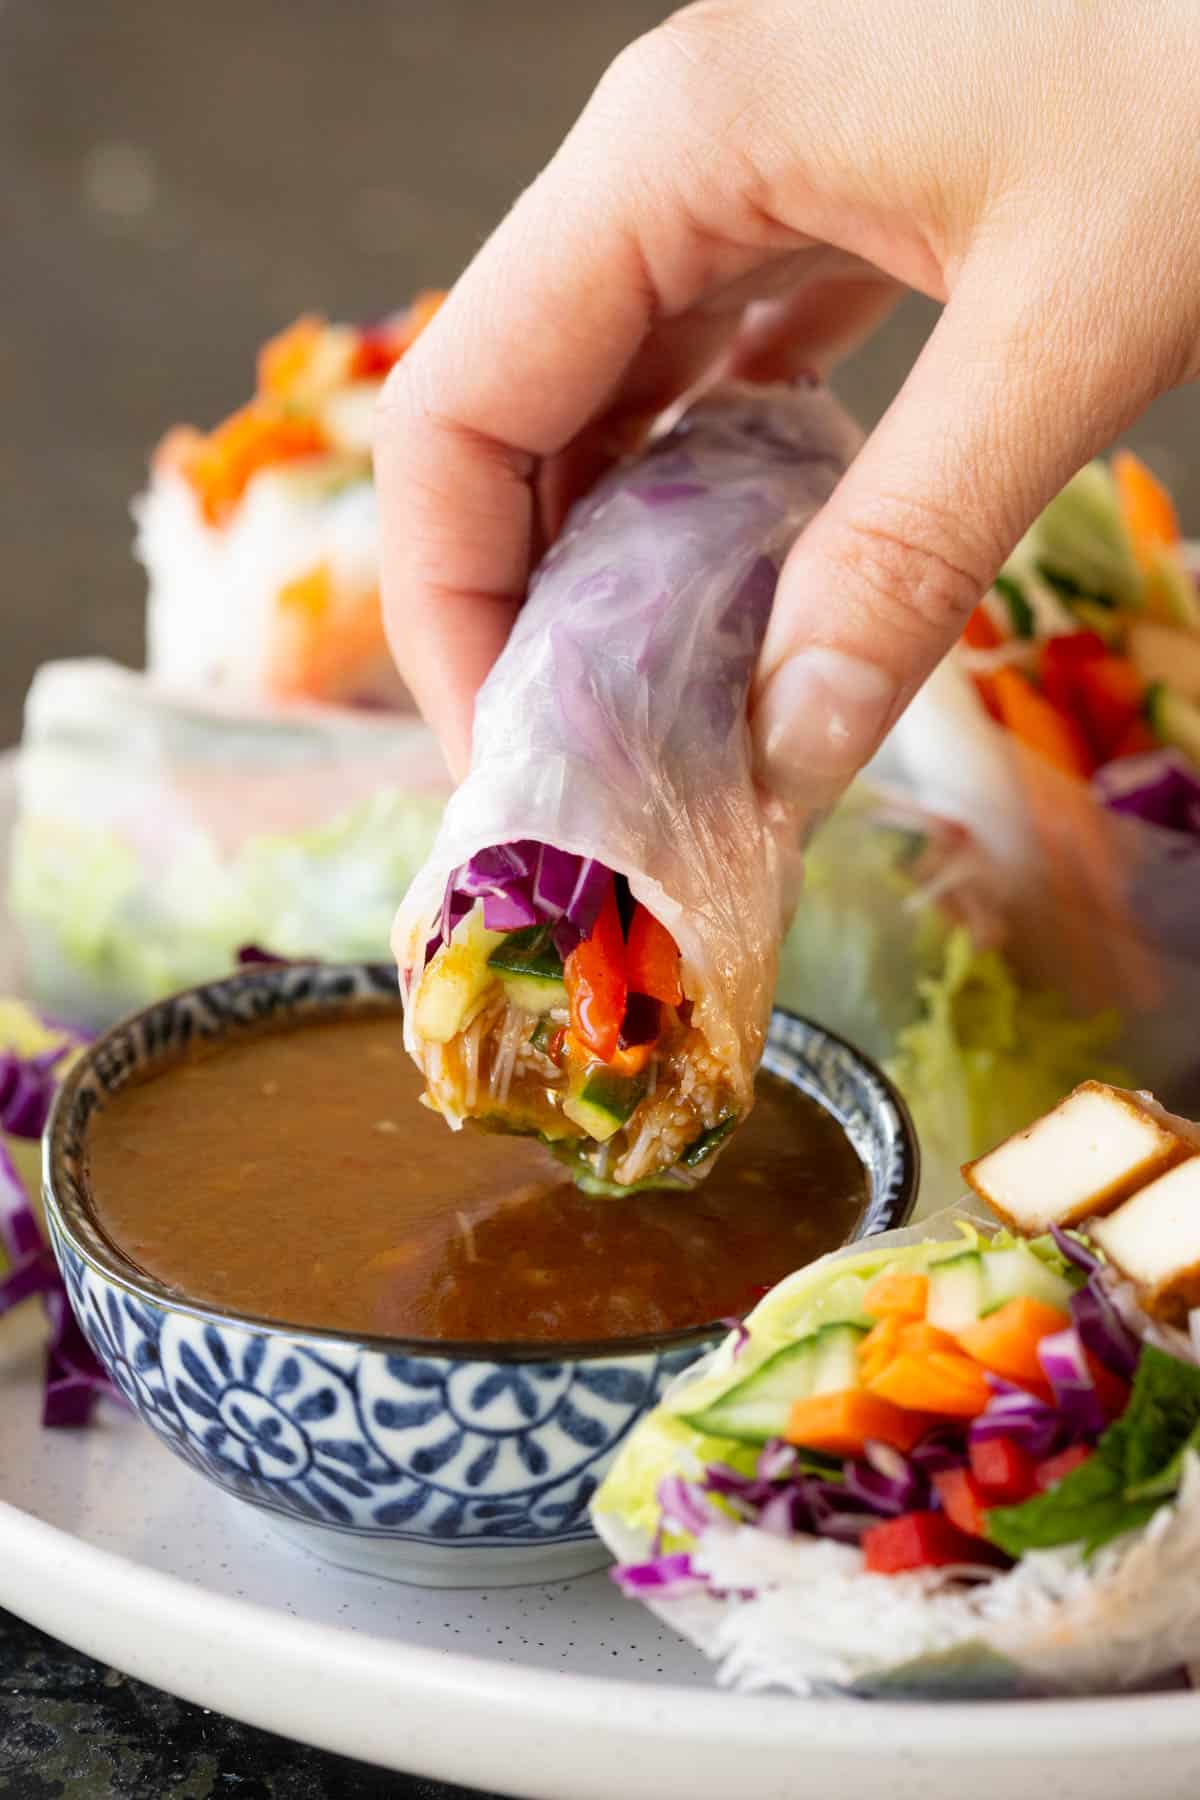 A vegetarian rice paper roll is dipped into tamarind sauce.